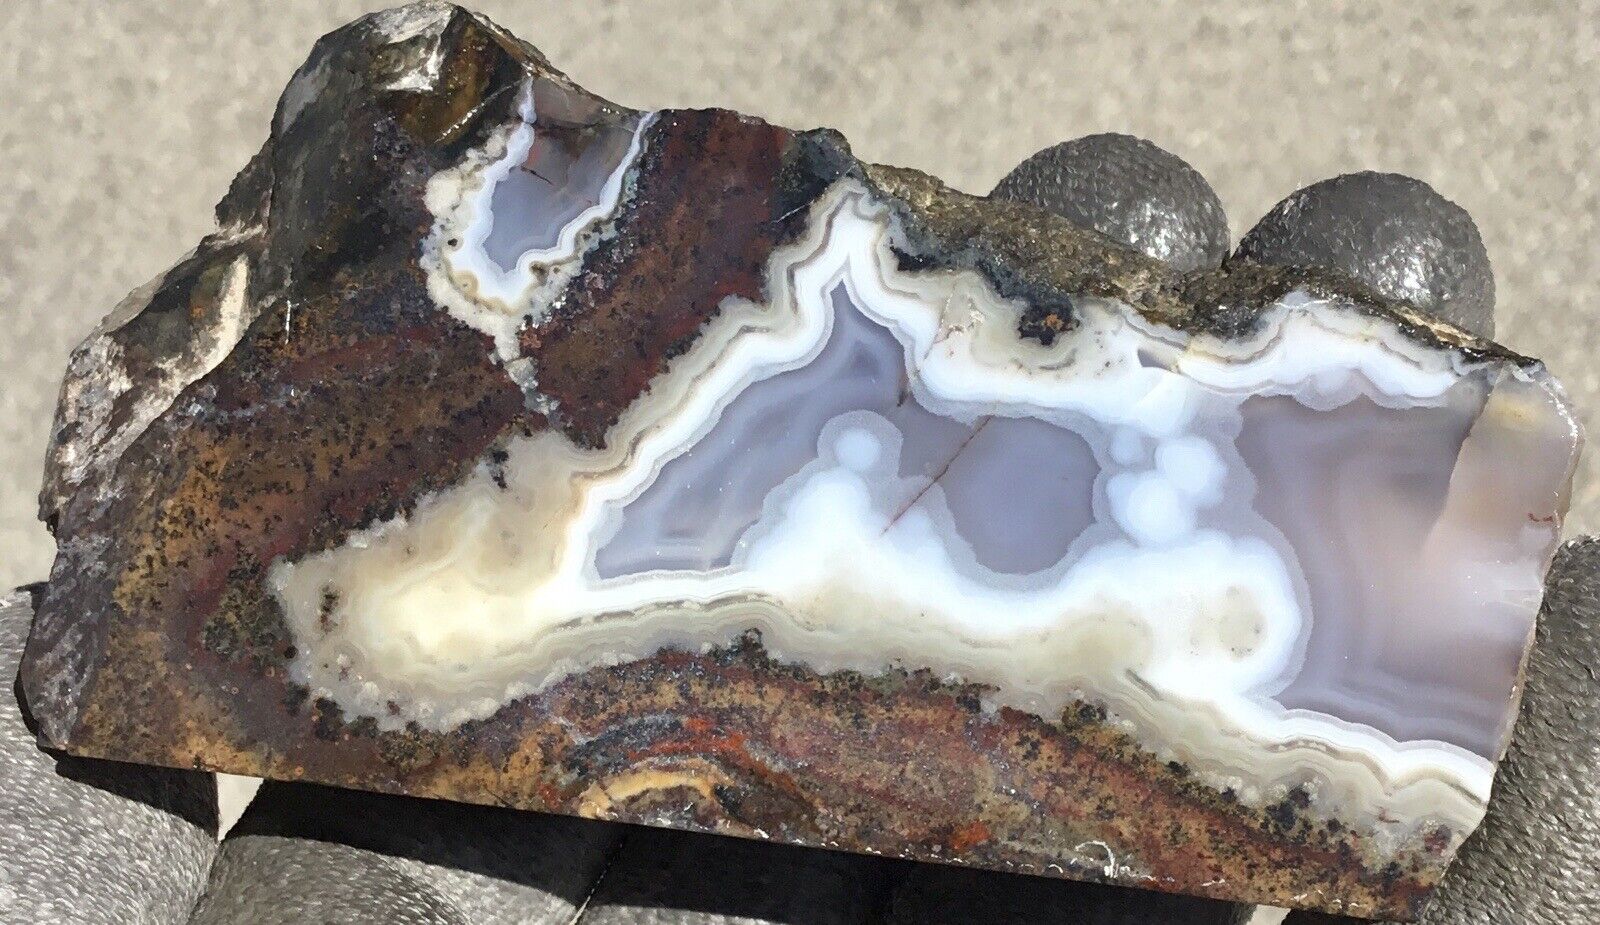 9.3 Oz Polished Moroccan Agate Ghost Seam Pseudomorph Display Piece